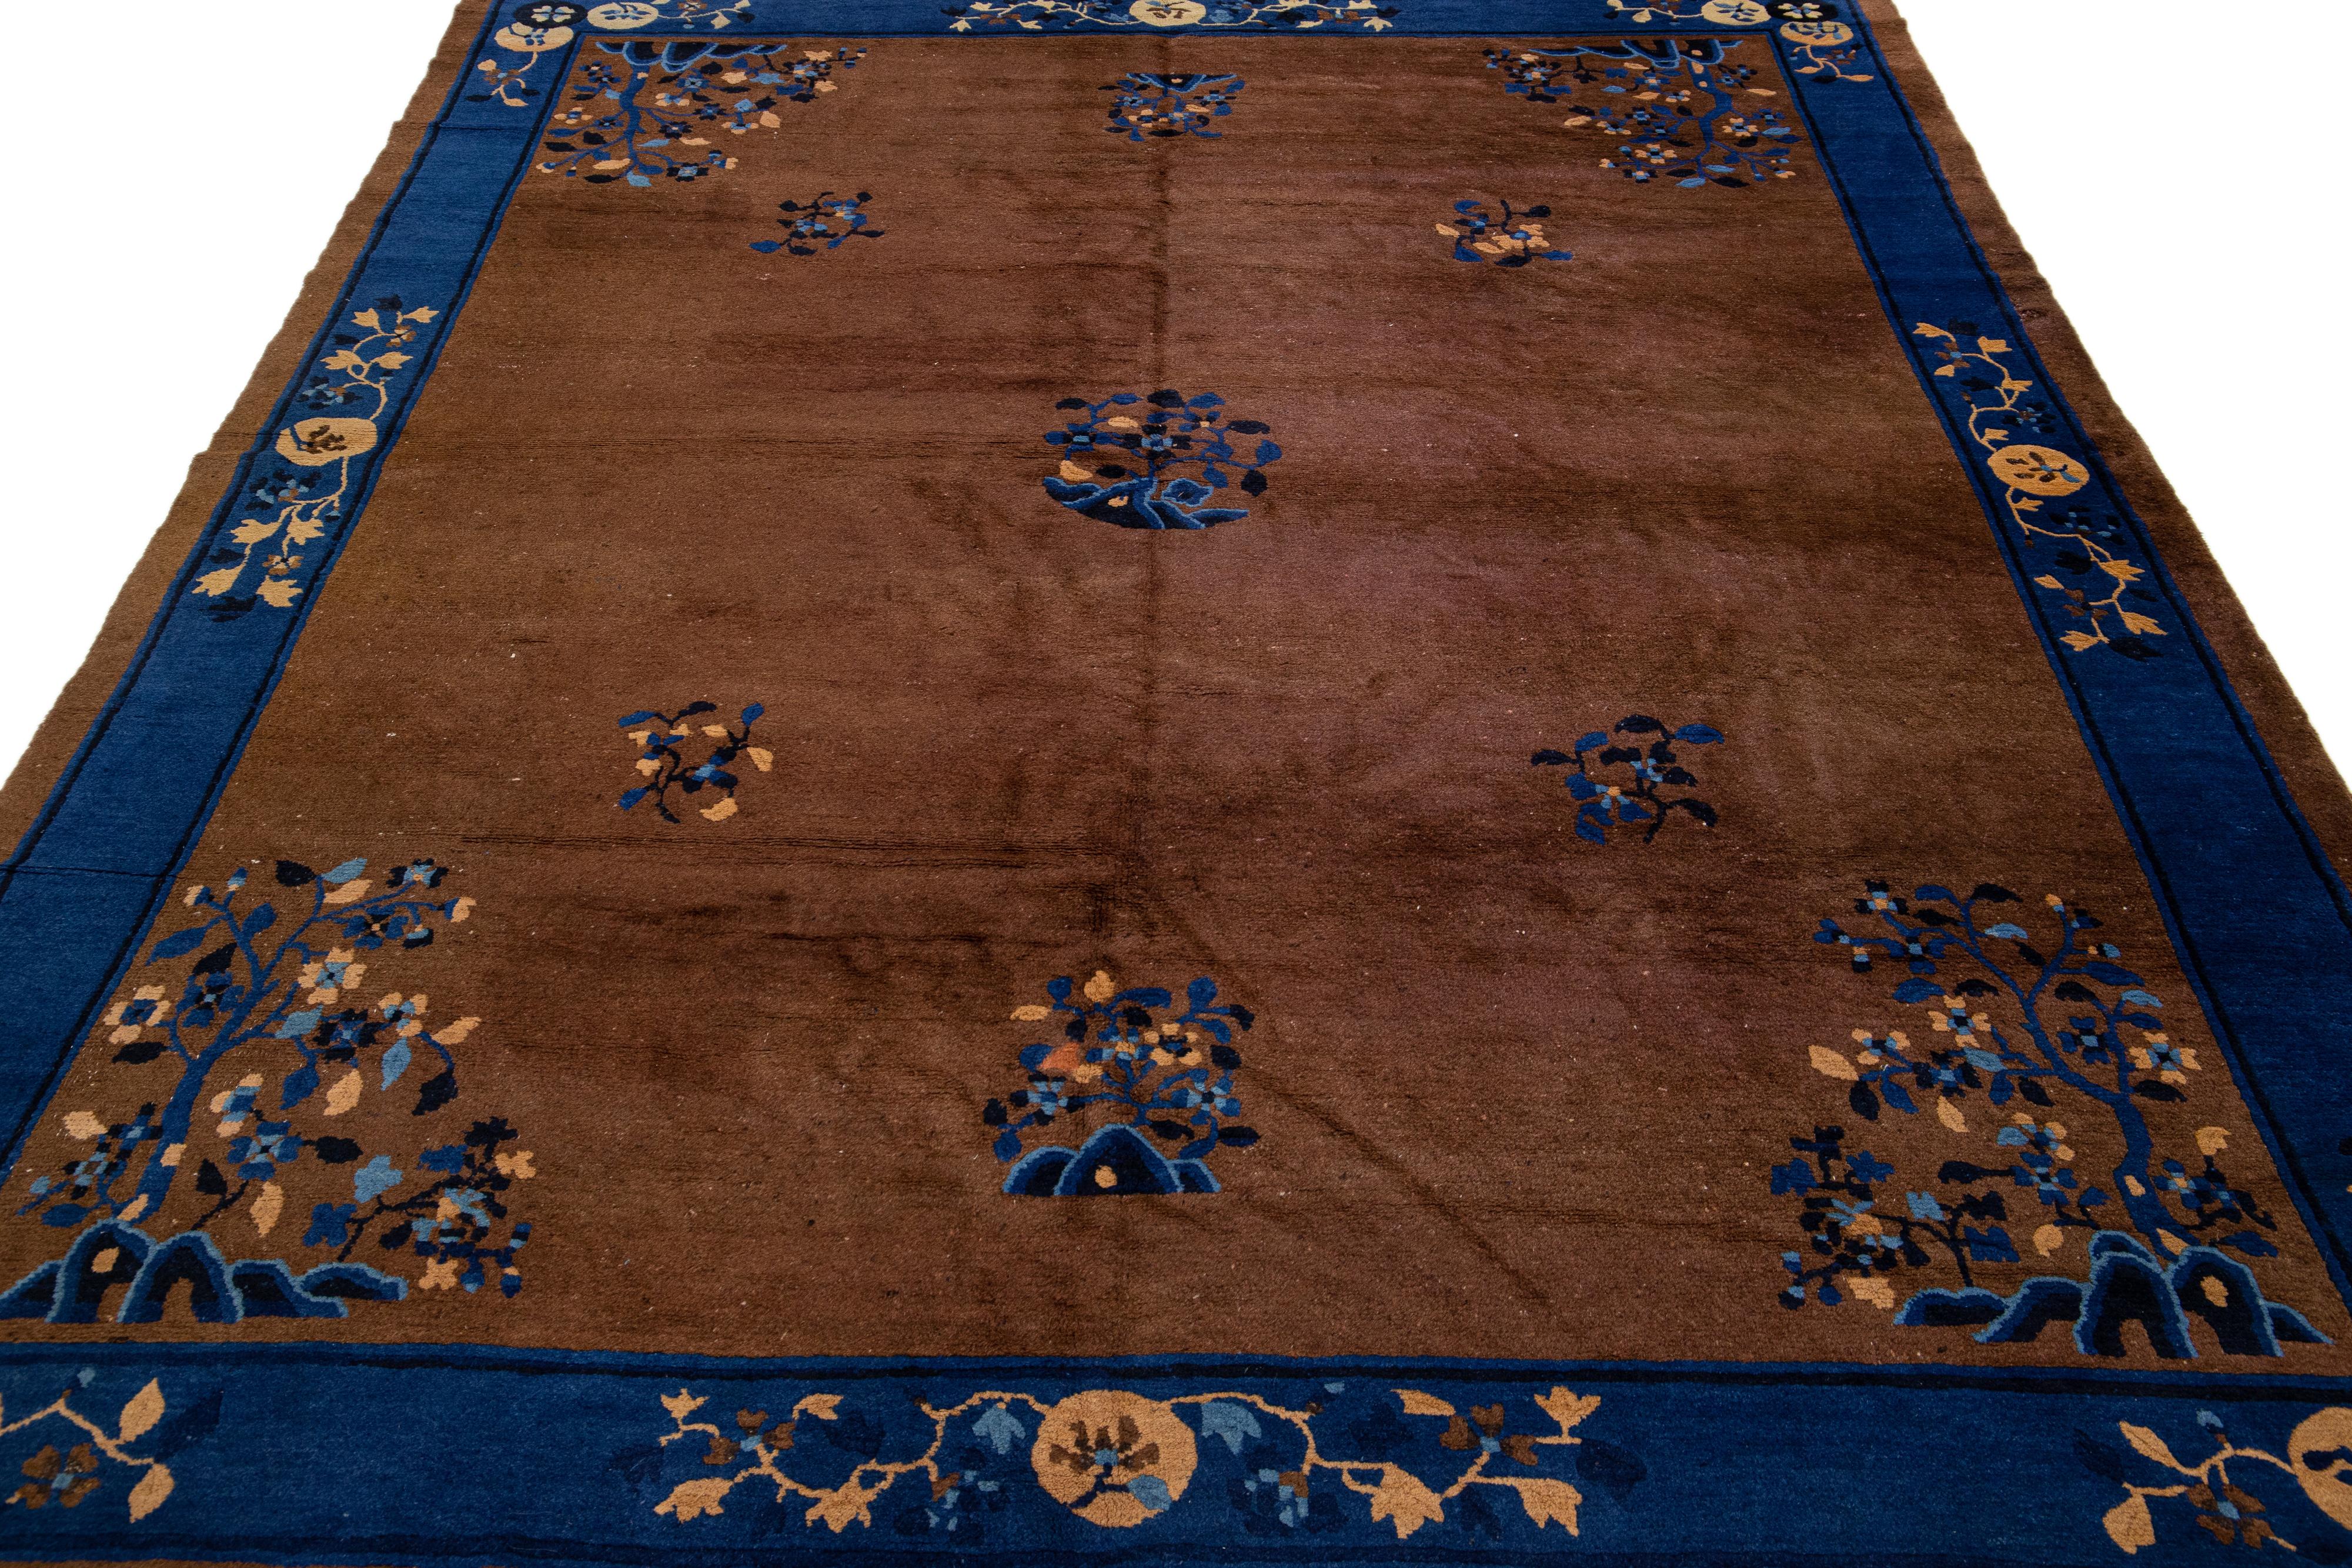 Beautiful antique Art Deco hand-knotted wool rug with a brown field. This Chinese rug has a blue frame and tan accent color with a gorgeous all-over Chinese floral design. 

This rug measures: 7'8